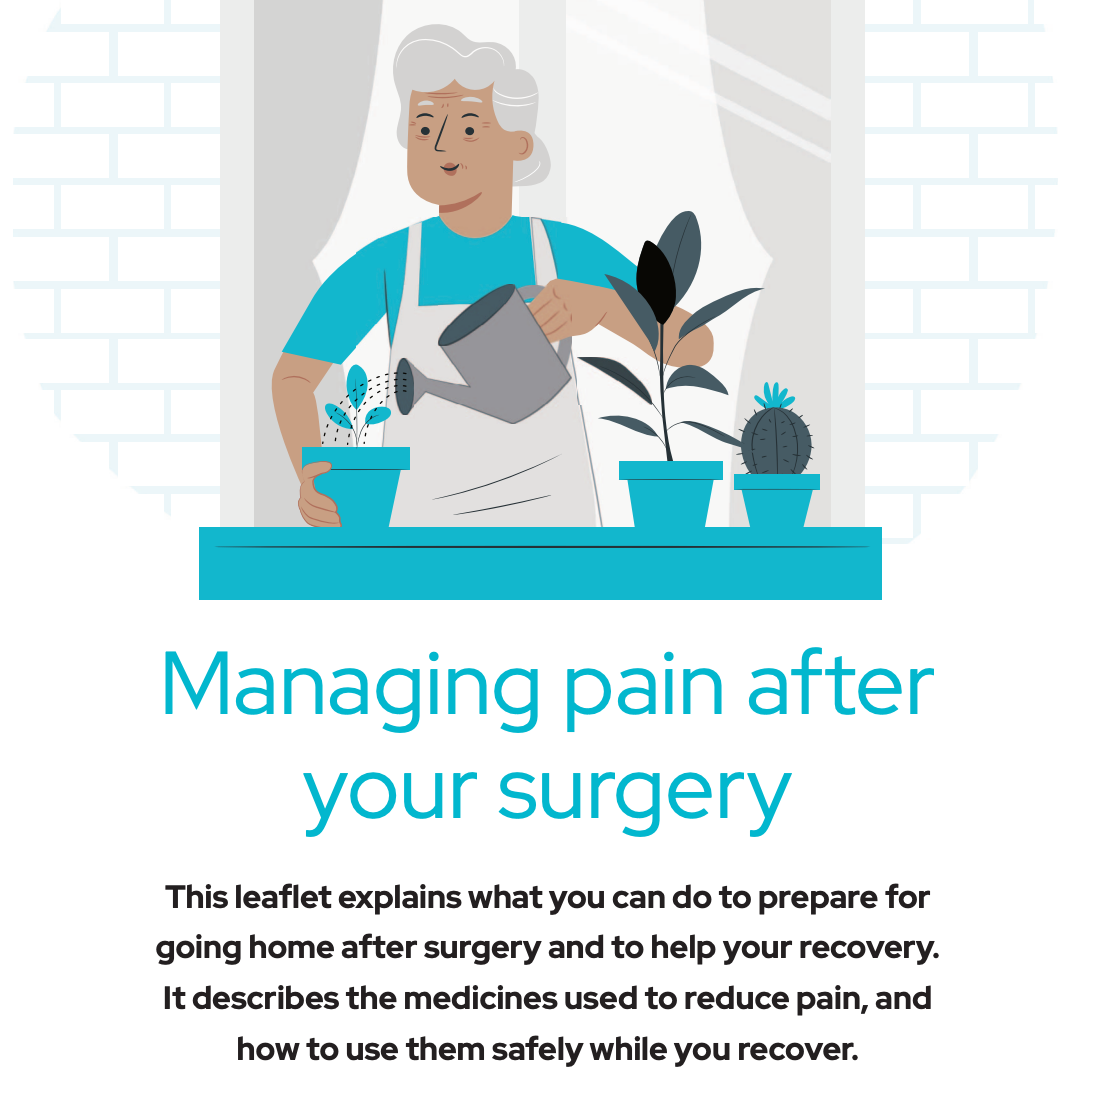 MANAGING PAIN AFTER YOUR SURGERY